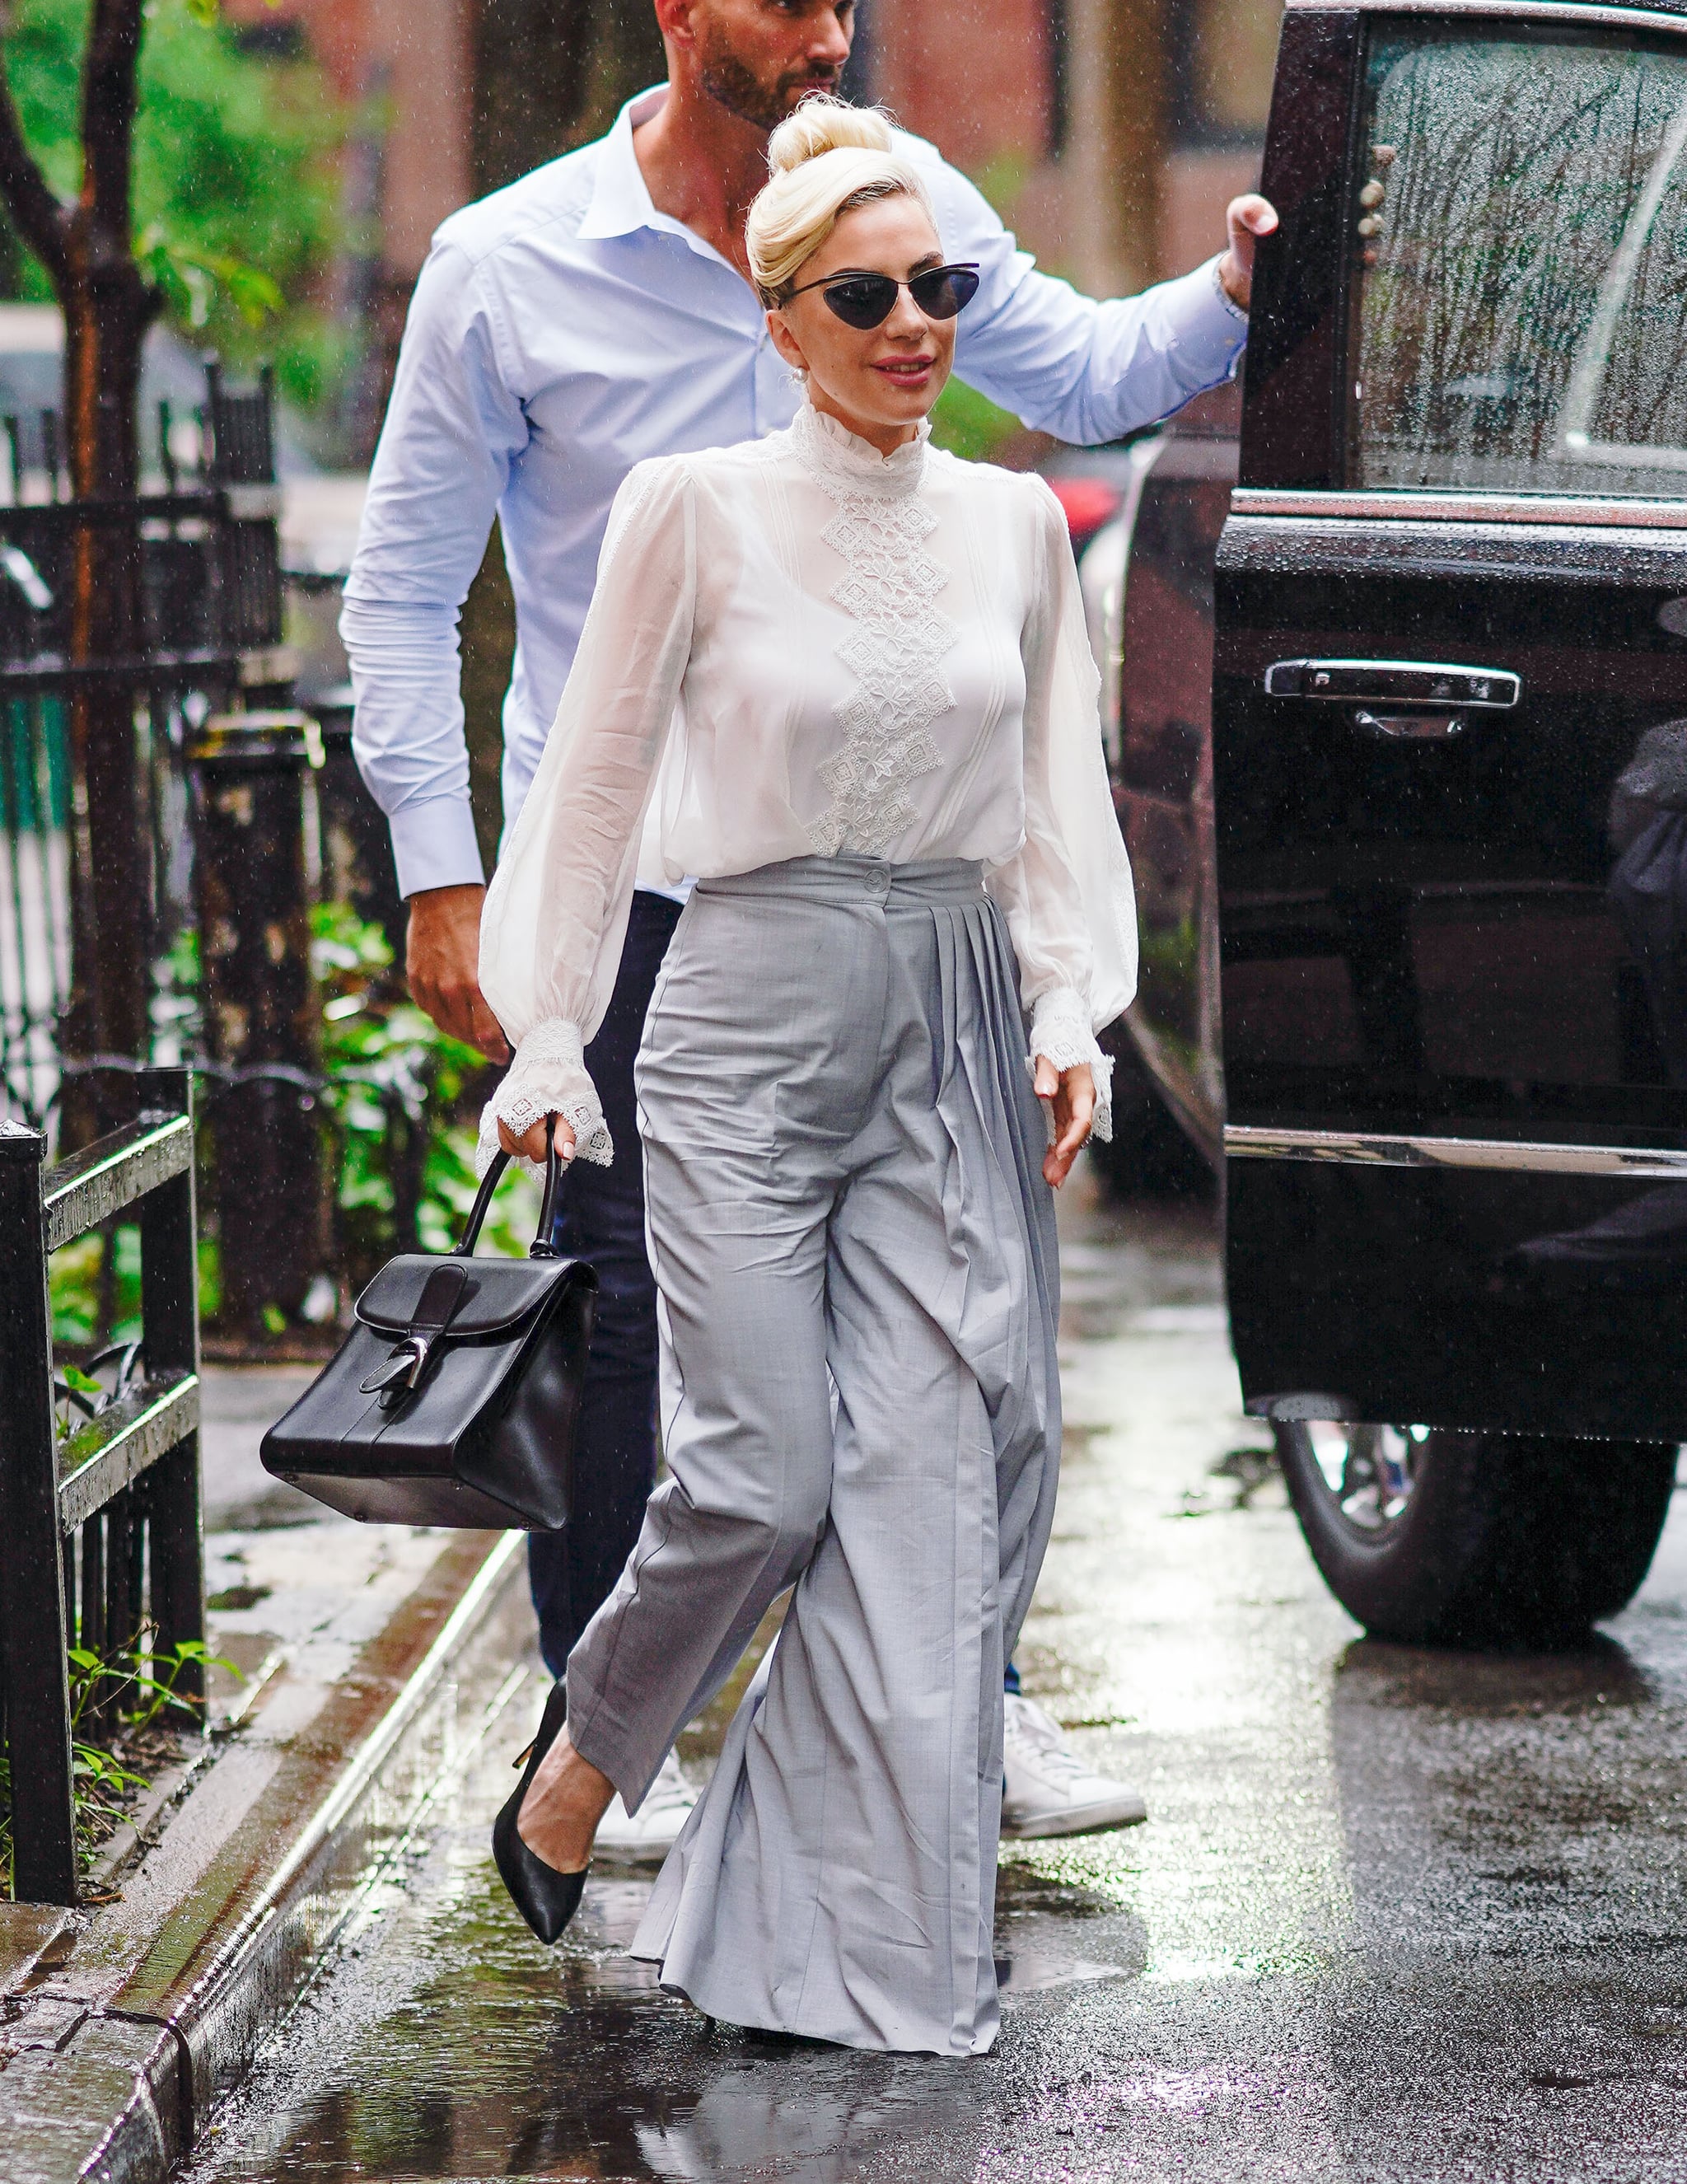 Lady Gaga's high-waist pants are statement-making, and the perfect